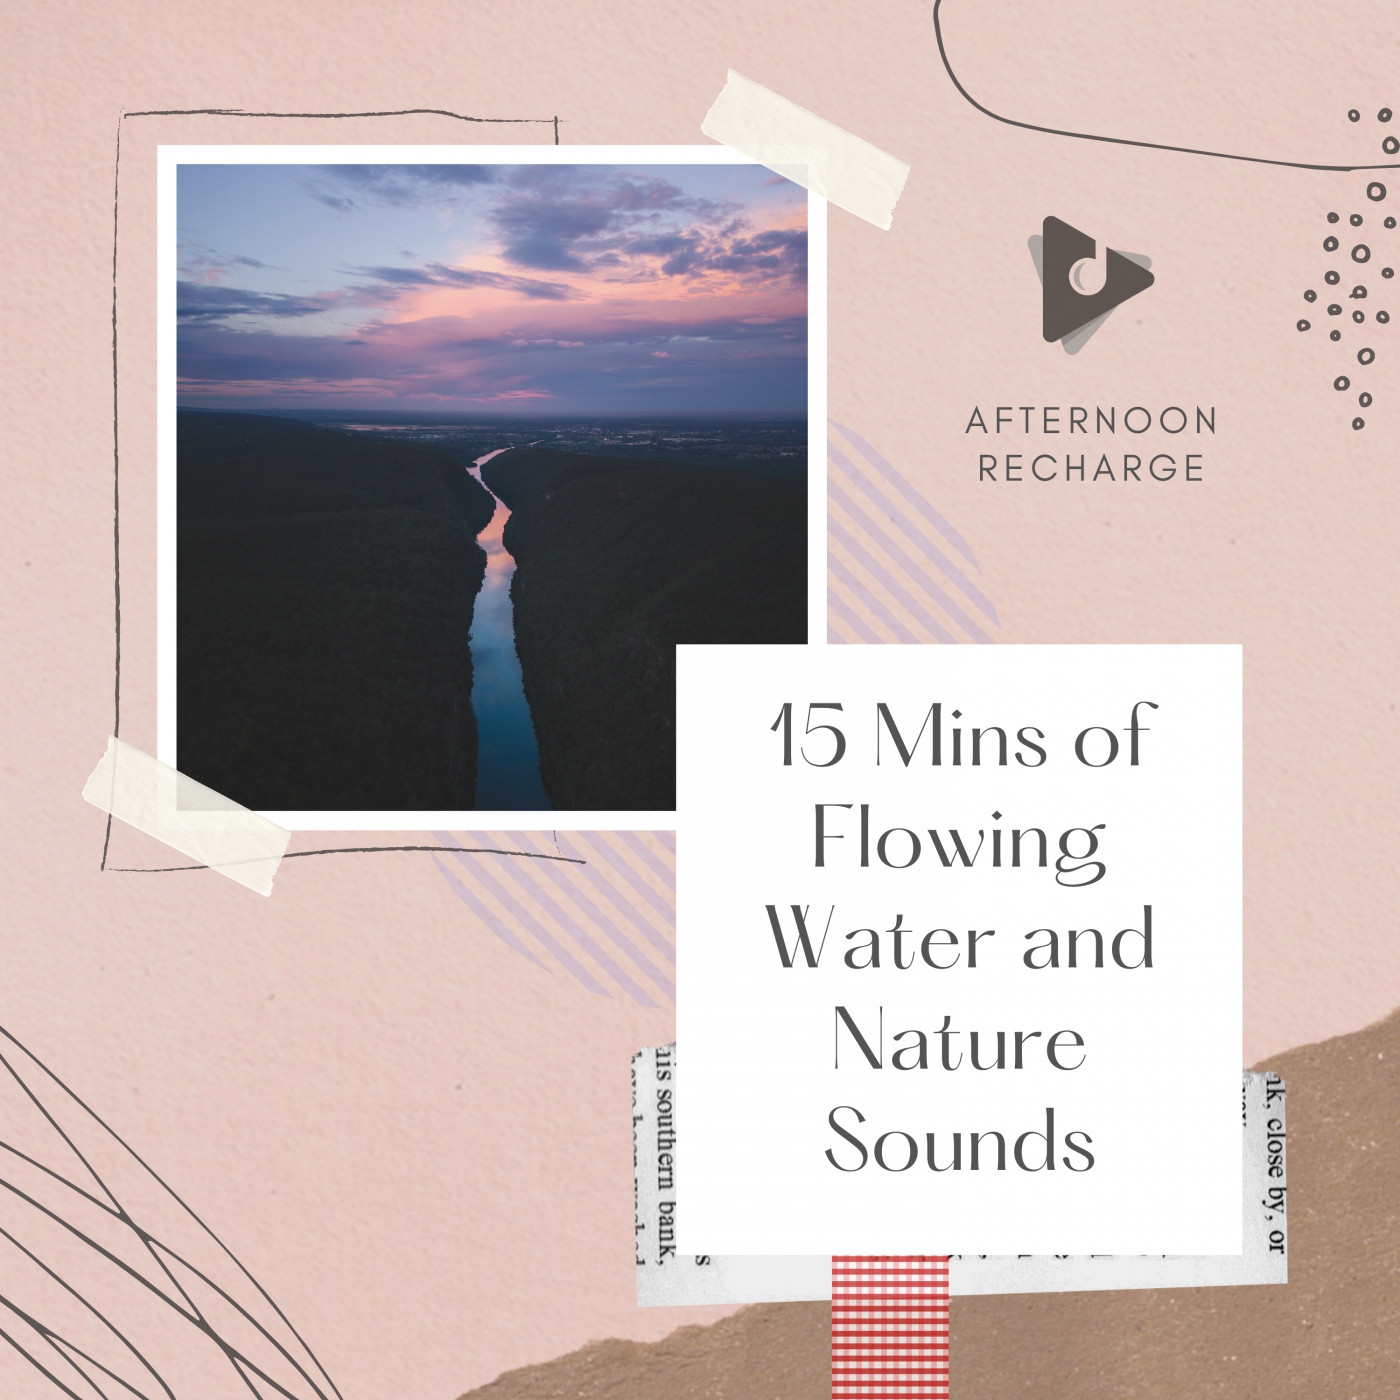 15 Mins of Flowing Water and Nature Sounds